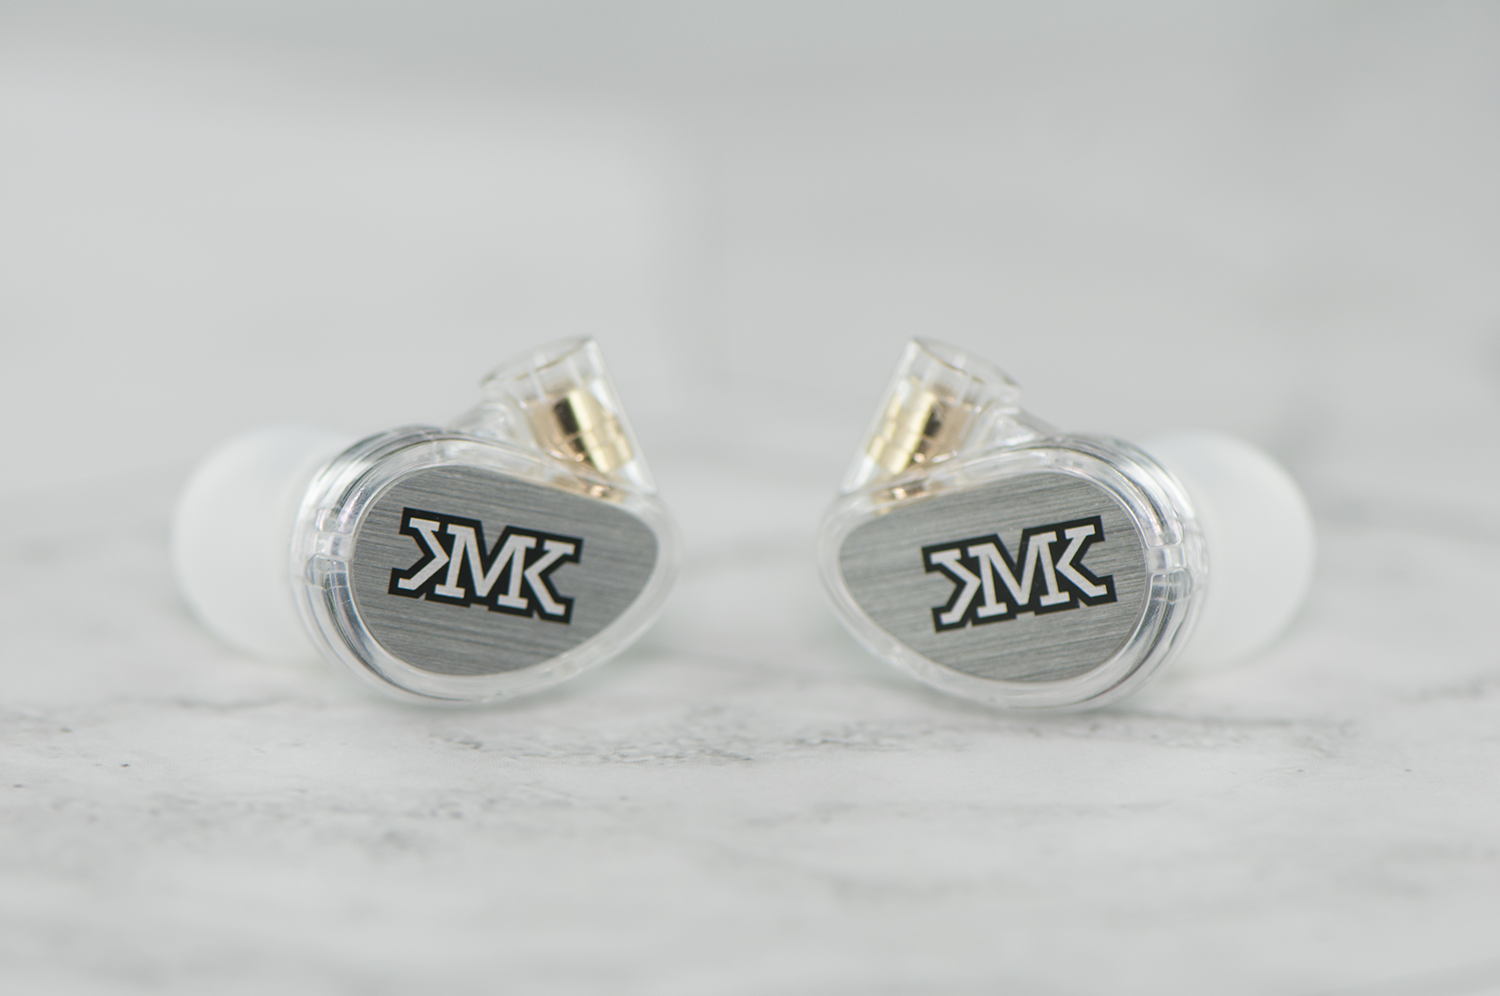 Two transparent in-ear monitors with a "jmk" logo, resting on a gray marble surface, showcasing a metallic and clear design with gold-tone accents.